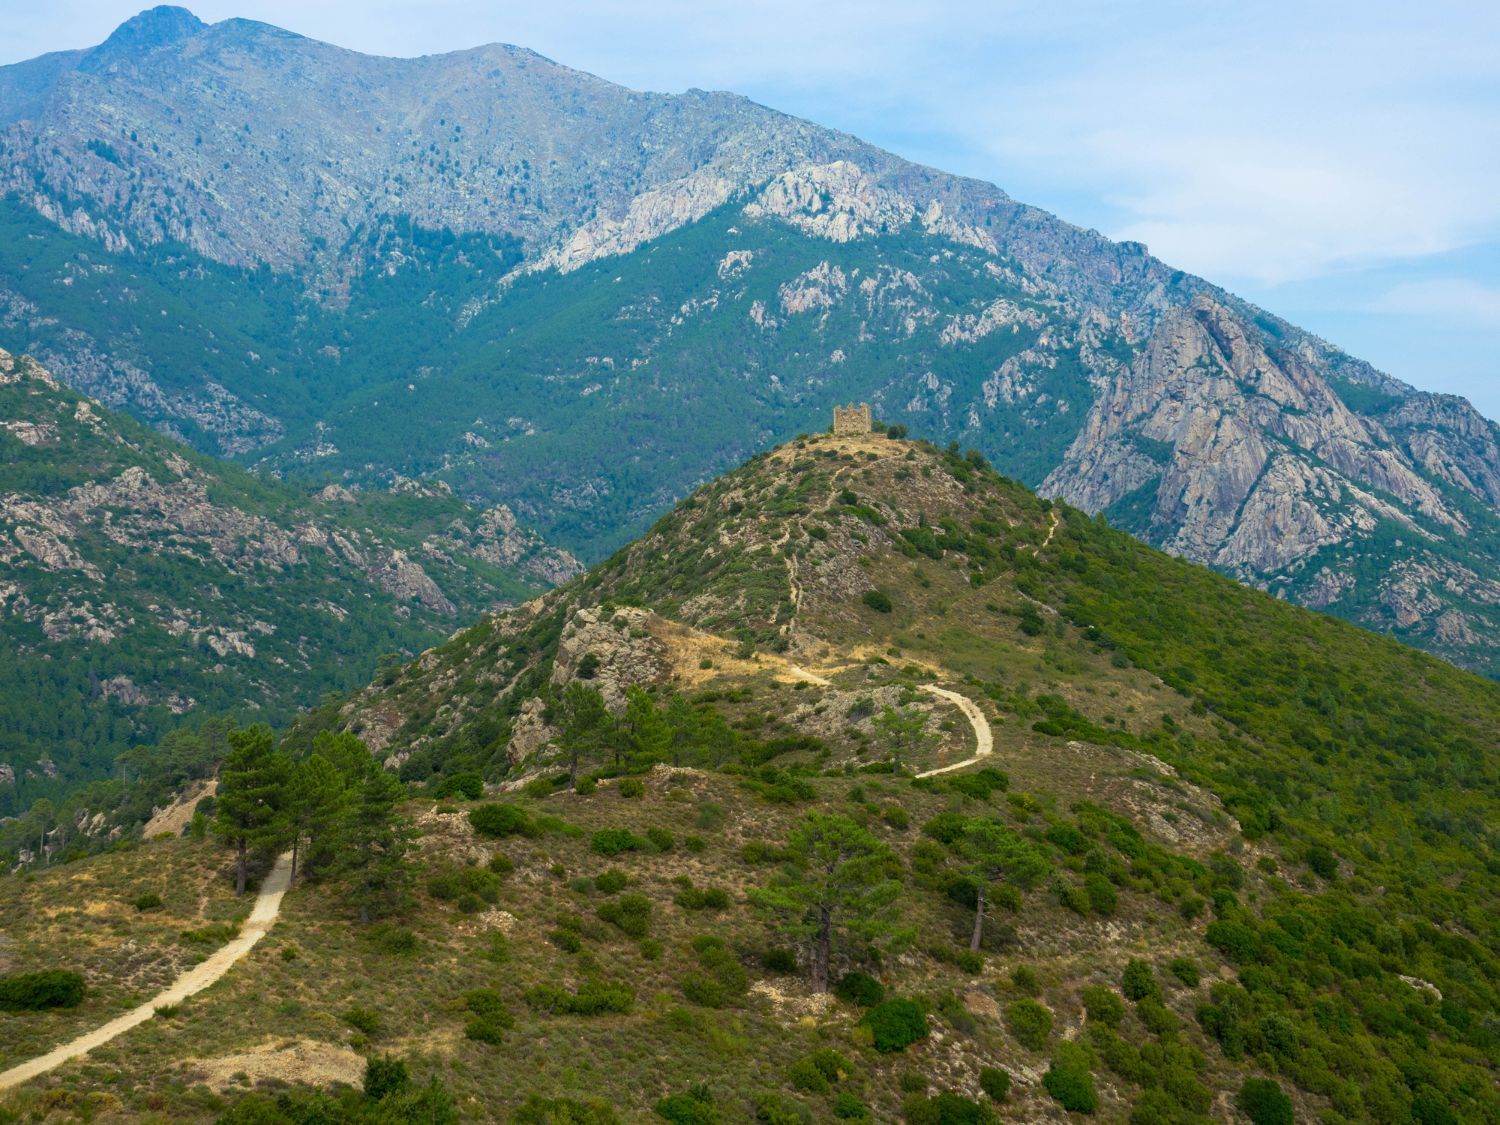 The Bavella Mountains on Corsica's GR20 trail